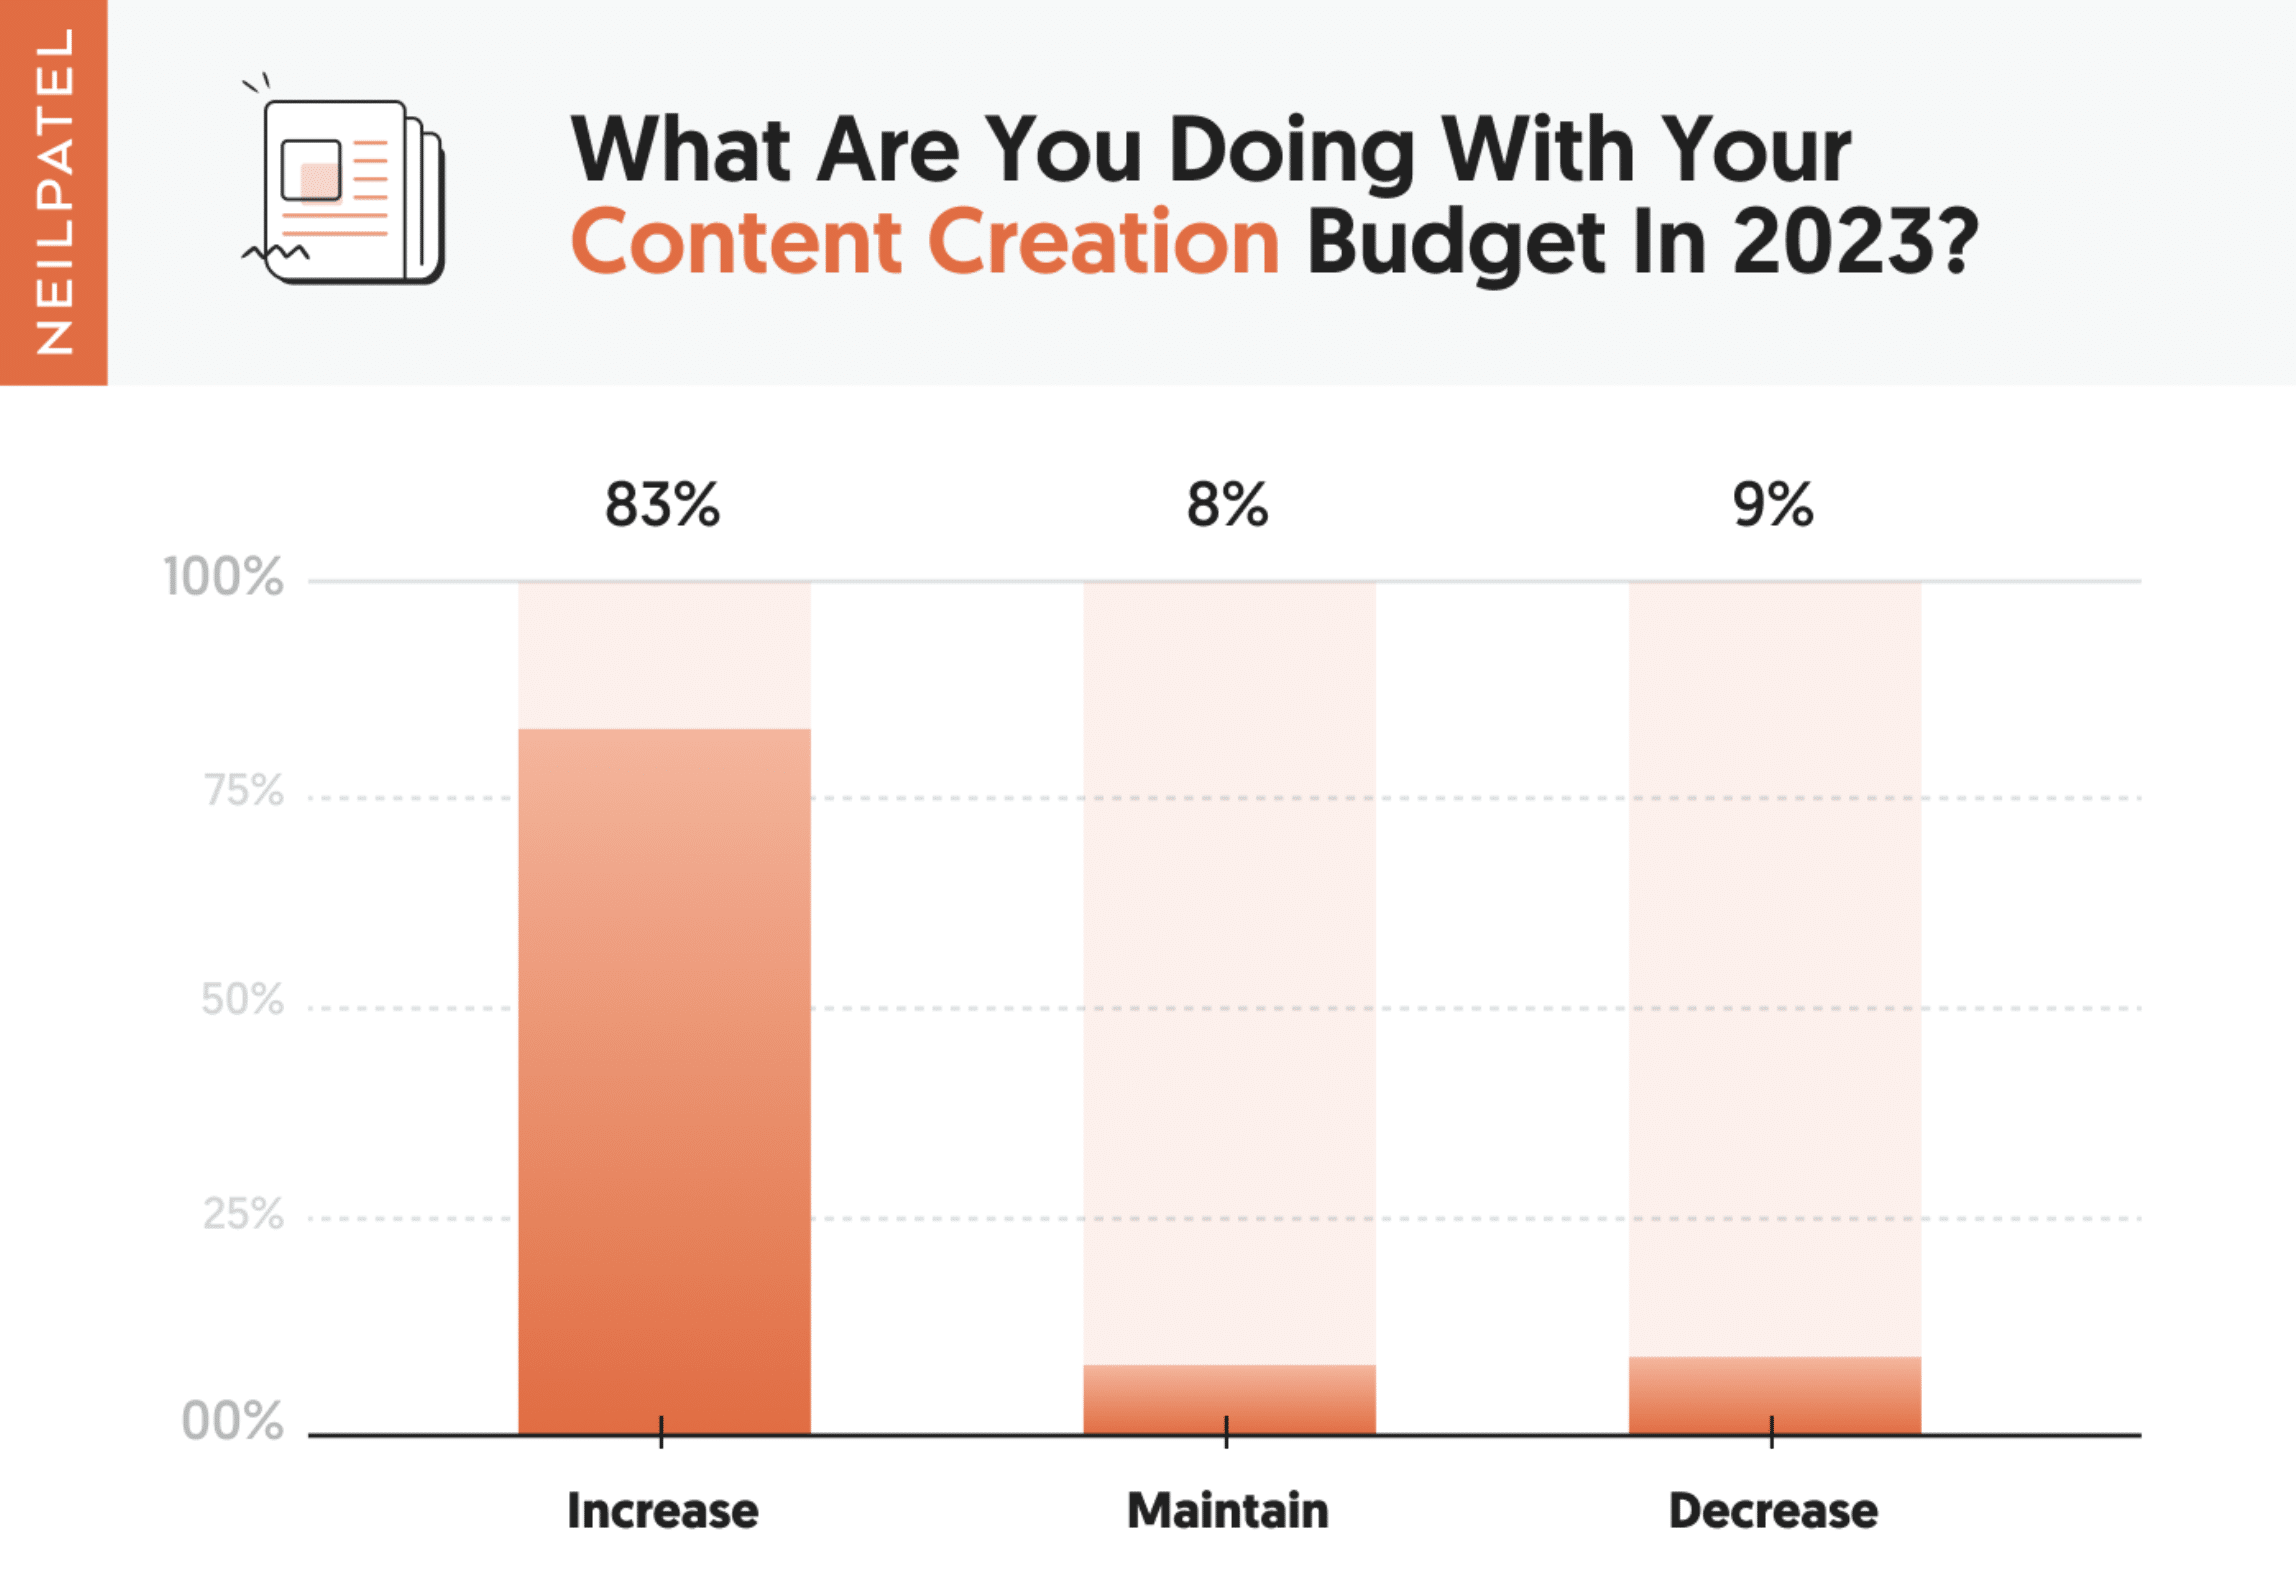 bar graph shows that 83% of marketers are going to increase their content creation budget in 2023